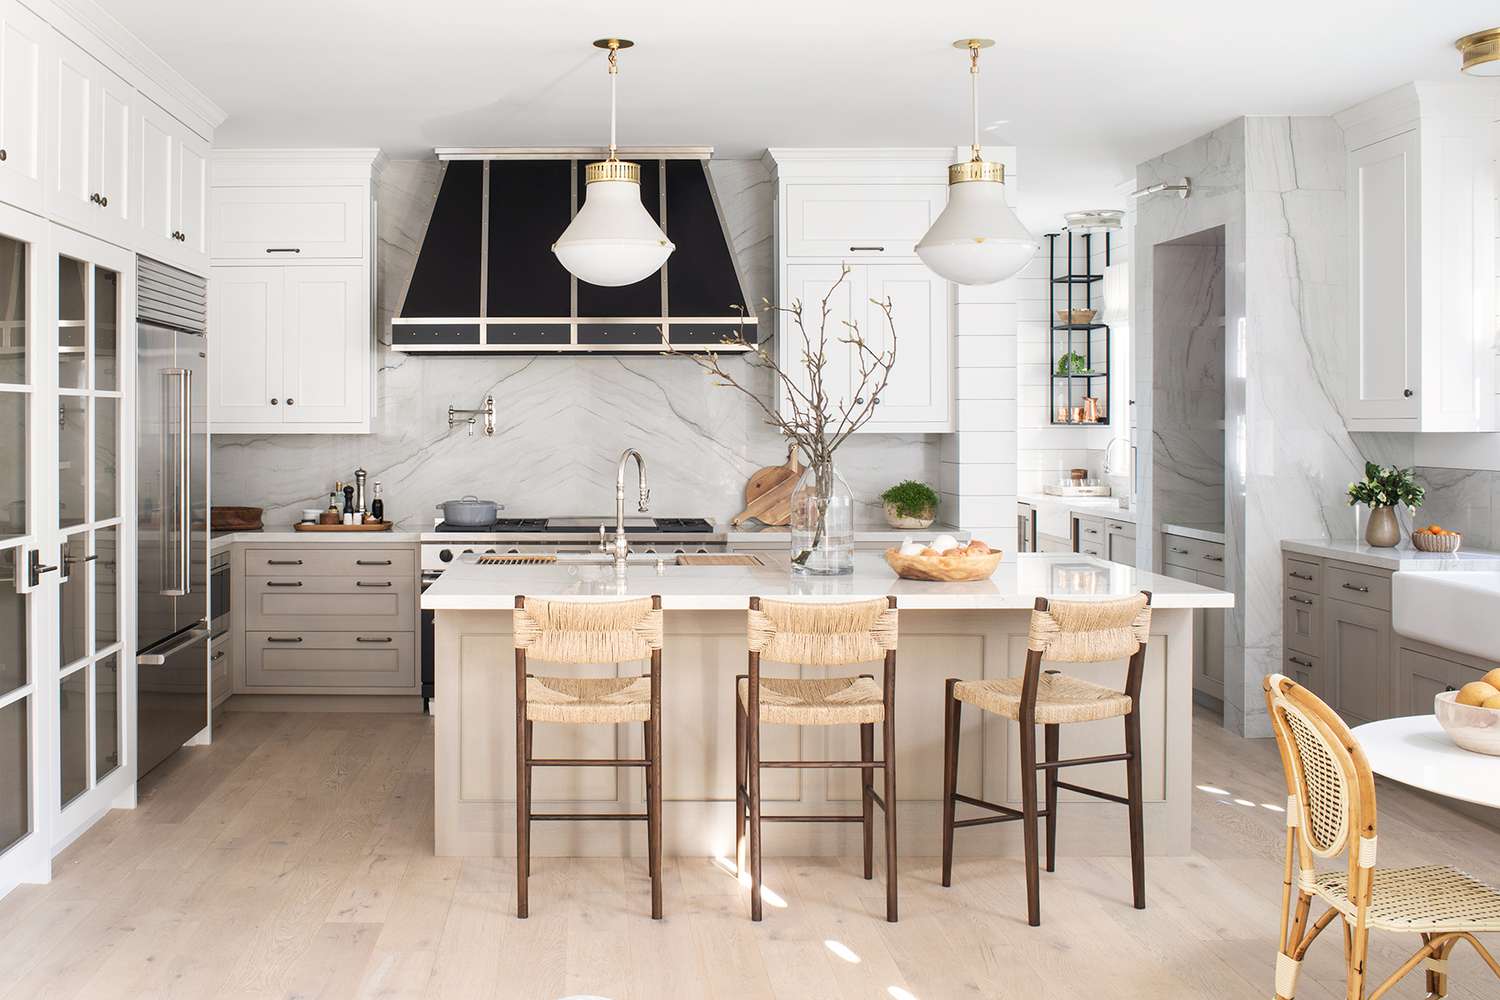 A Style Guide To The Most Beautiful Kitchen Renovations